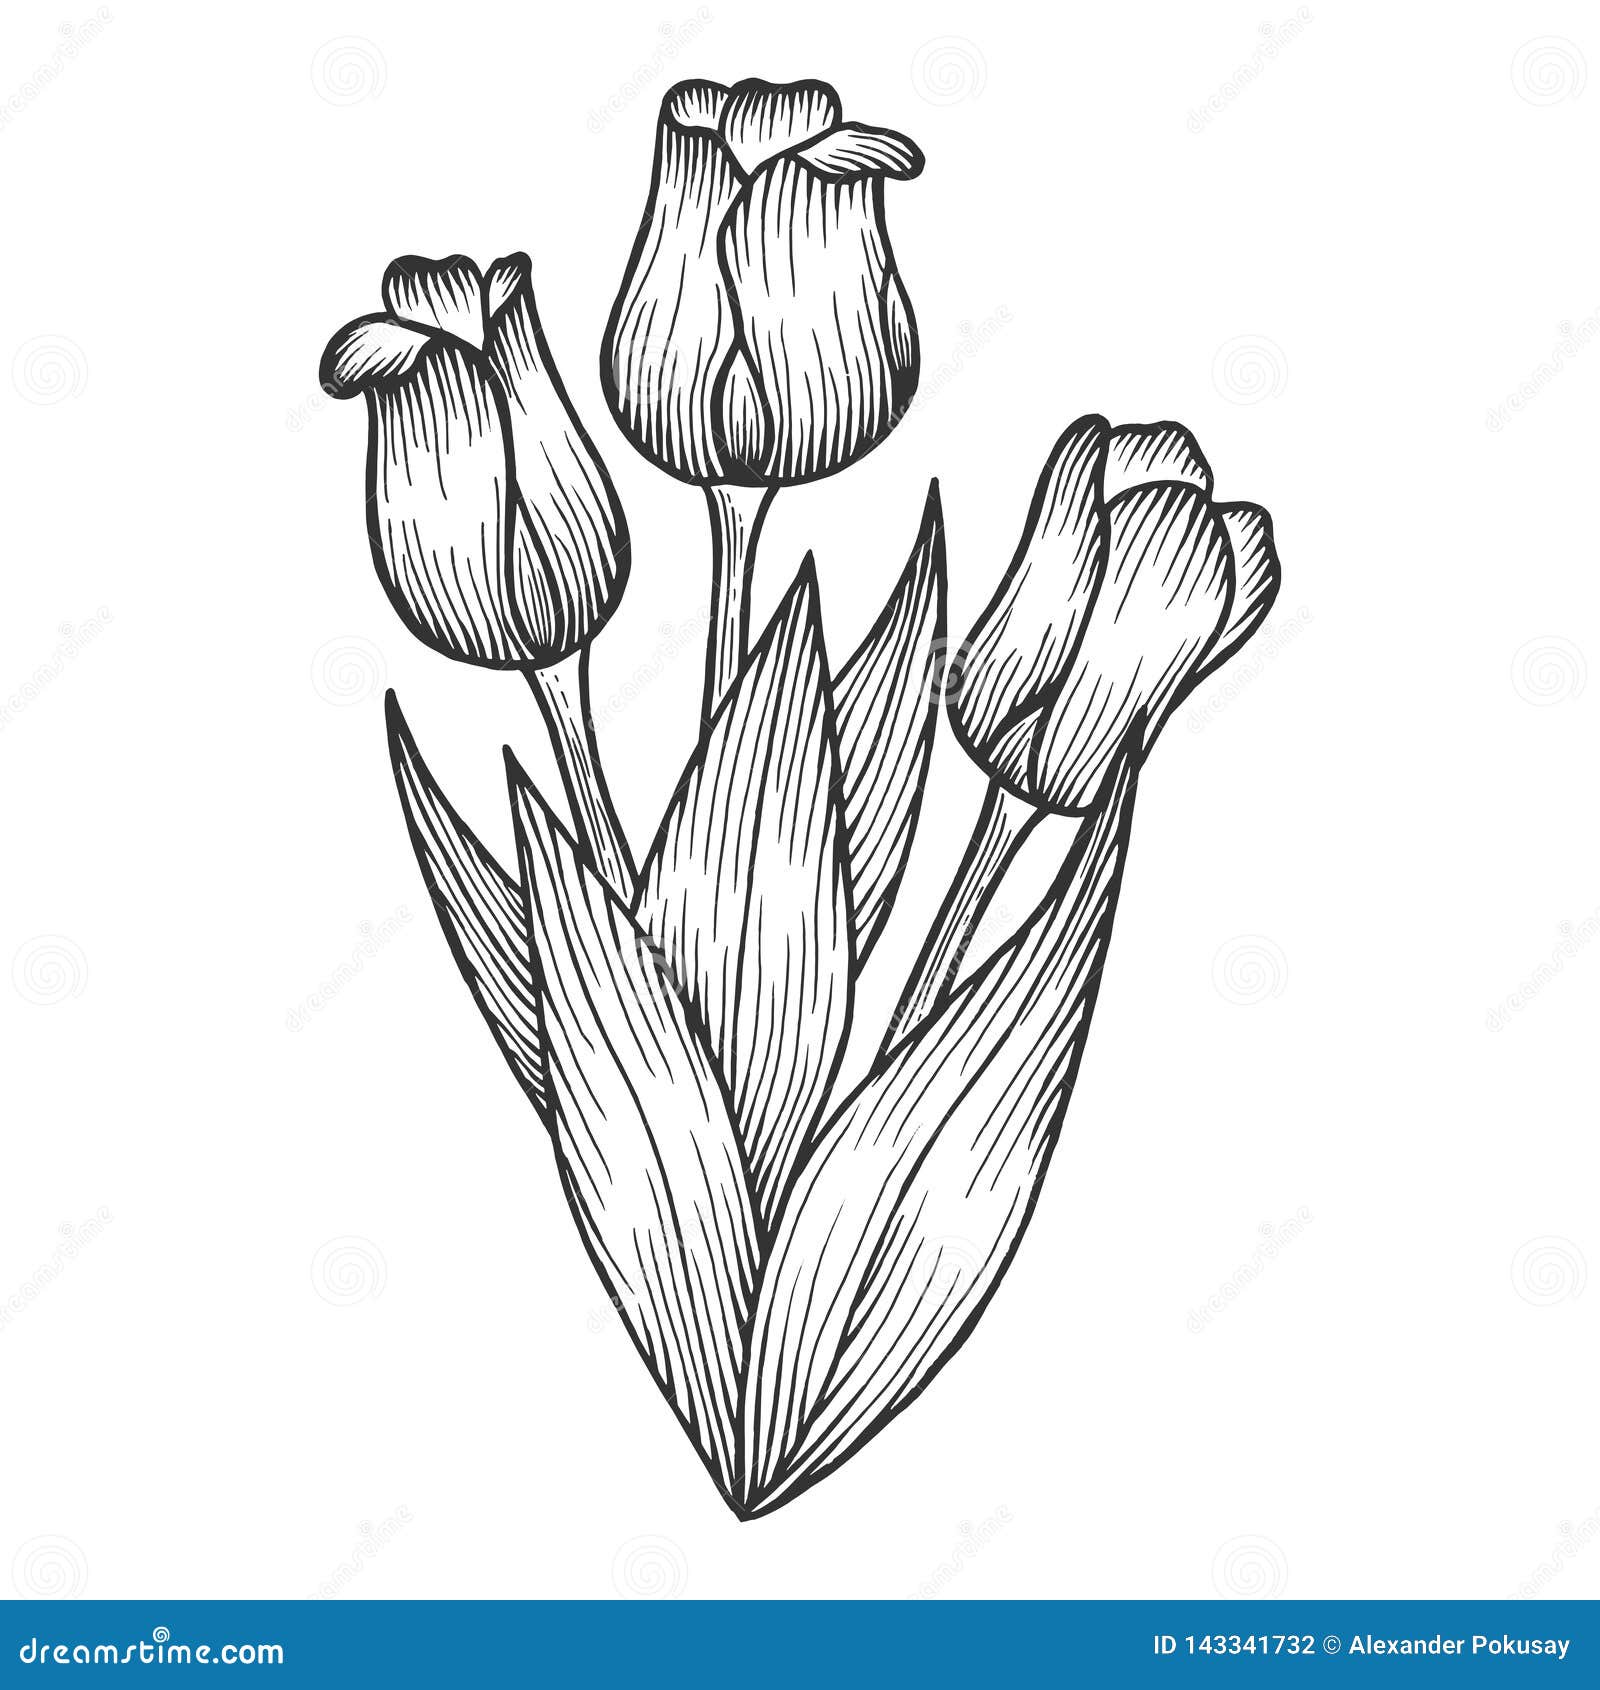 Tulip Flowers Sketch Engraving Vector Stock Vector - Illustration of ...